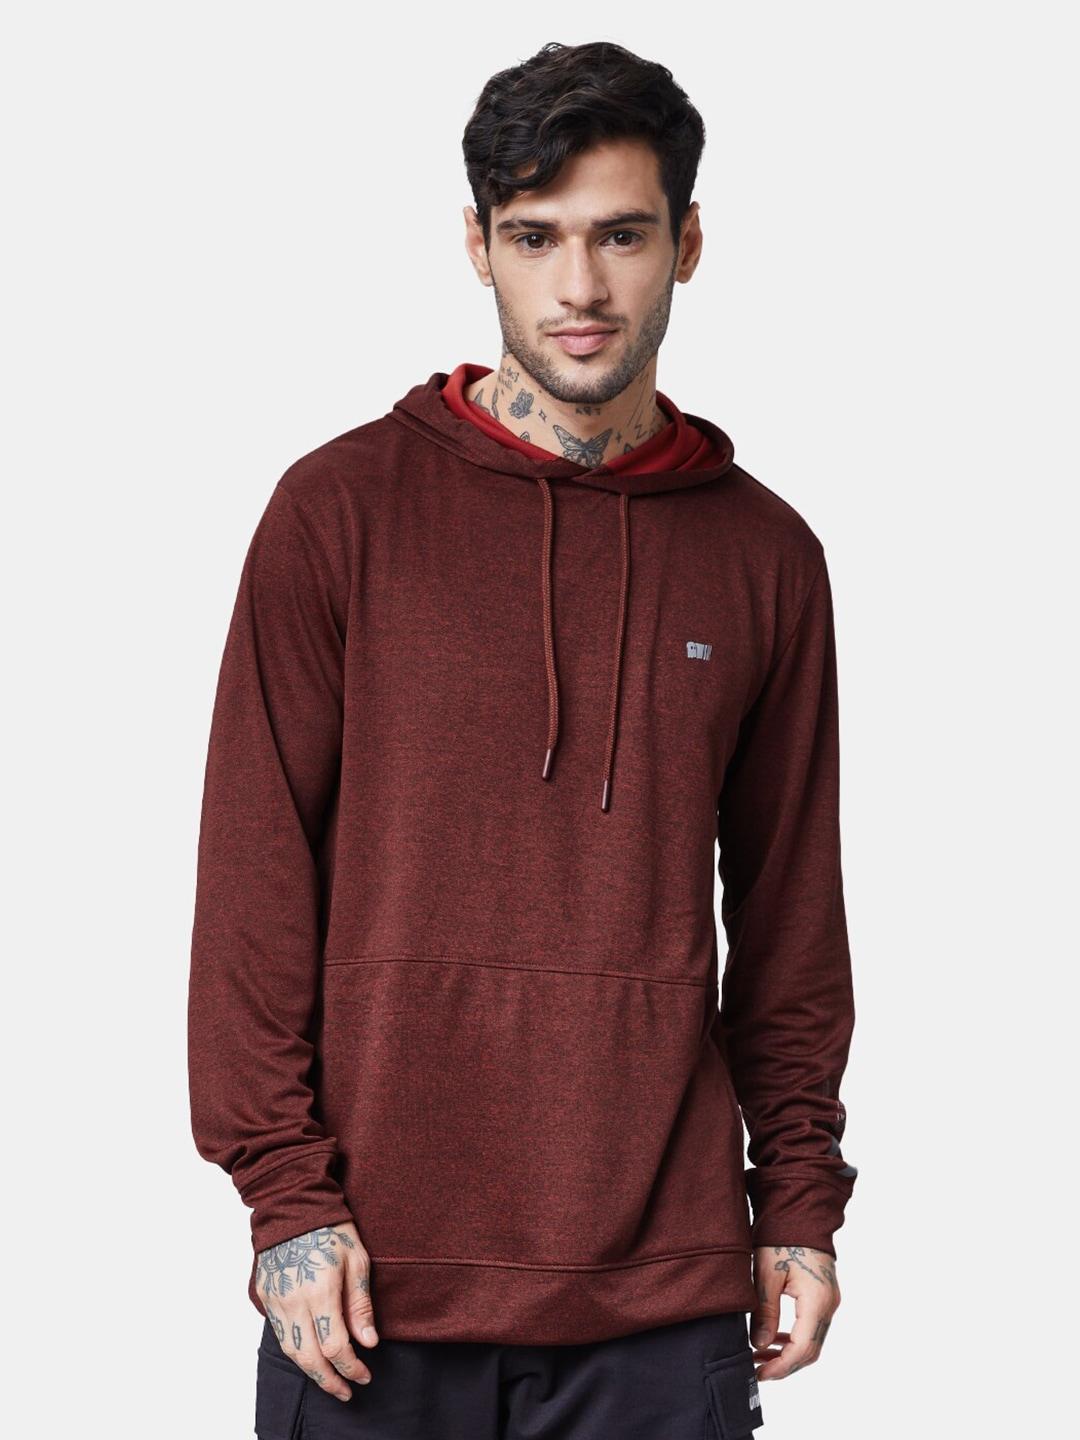 the-souled-store-hooded-pullover-sweatshirt